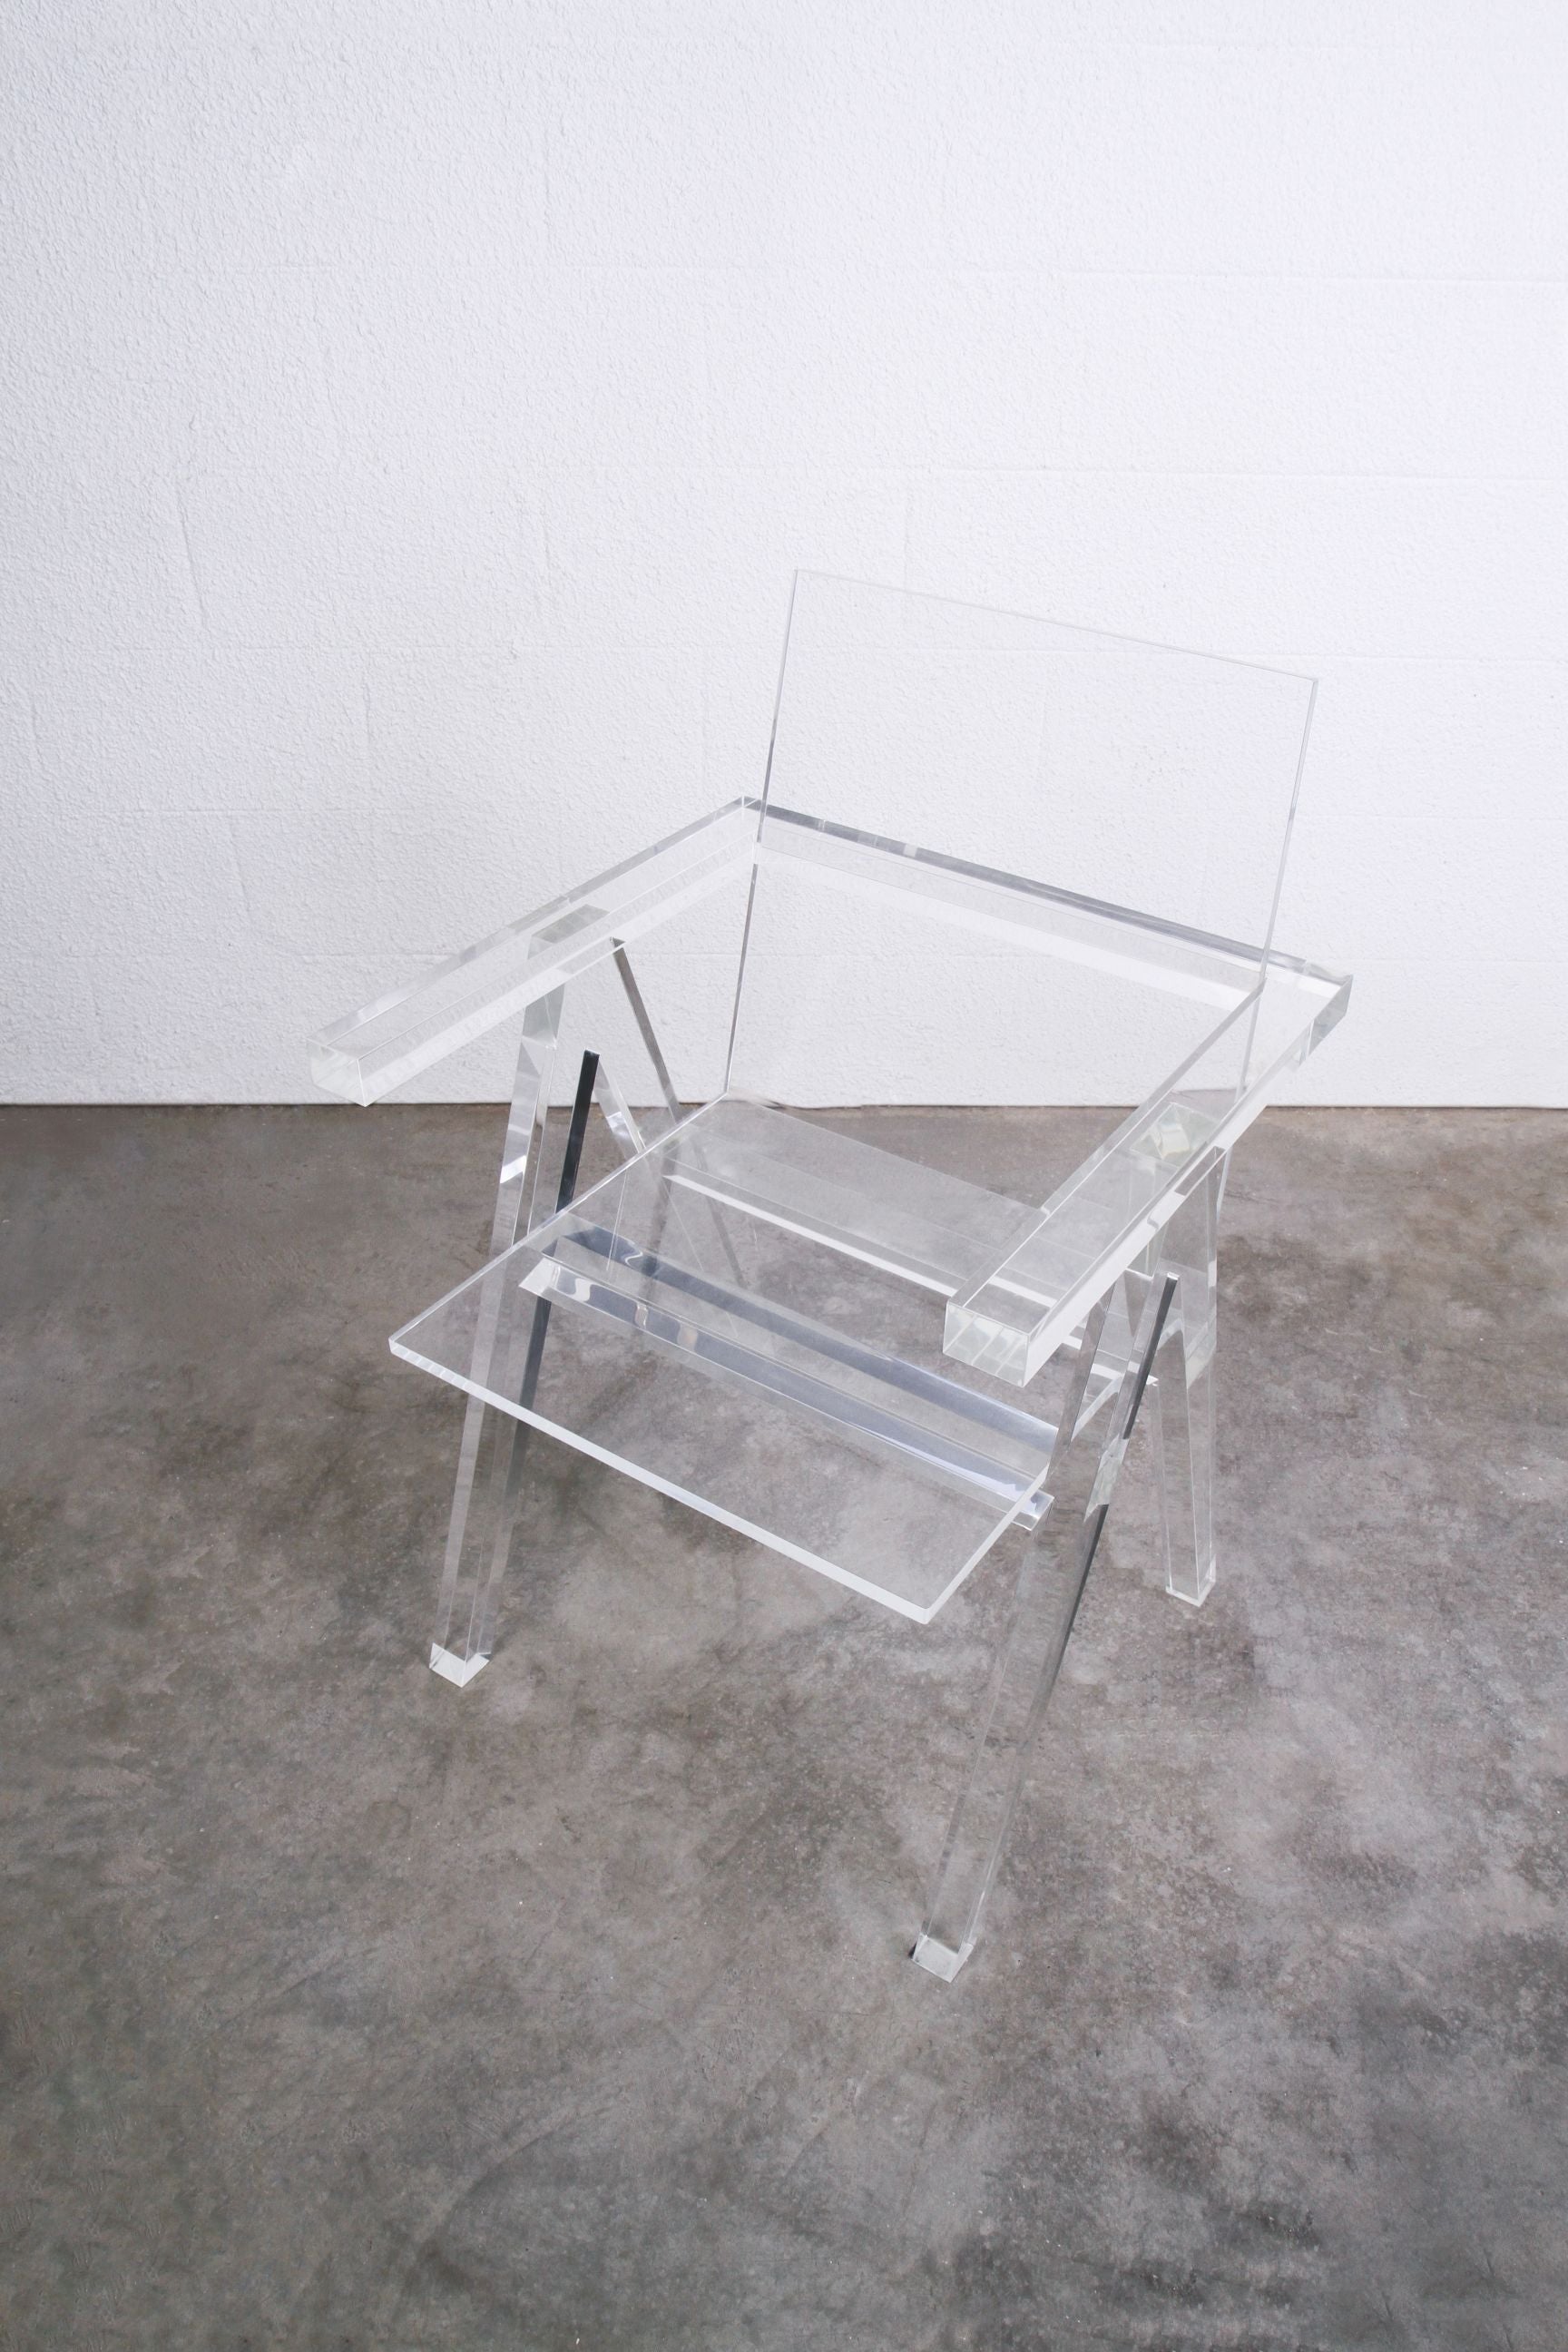 The MARCEL chair